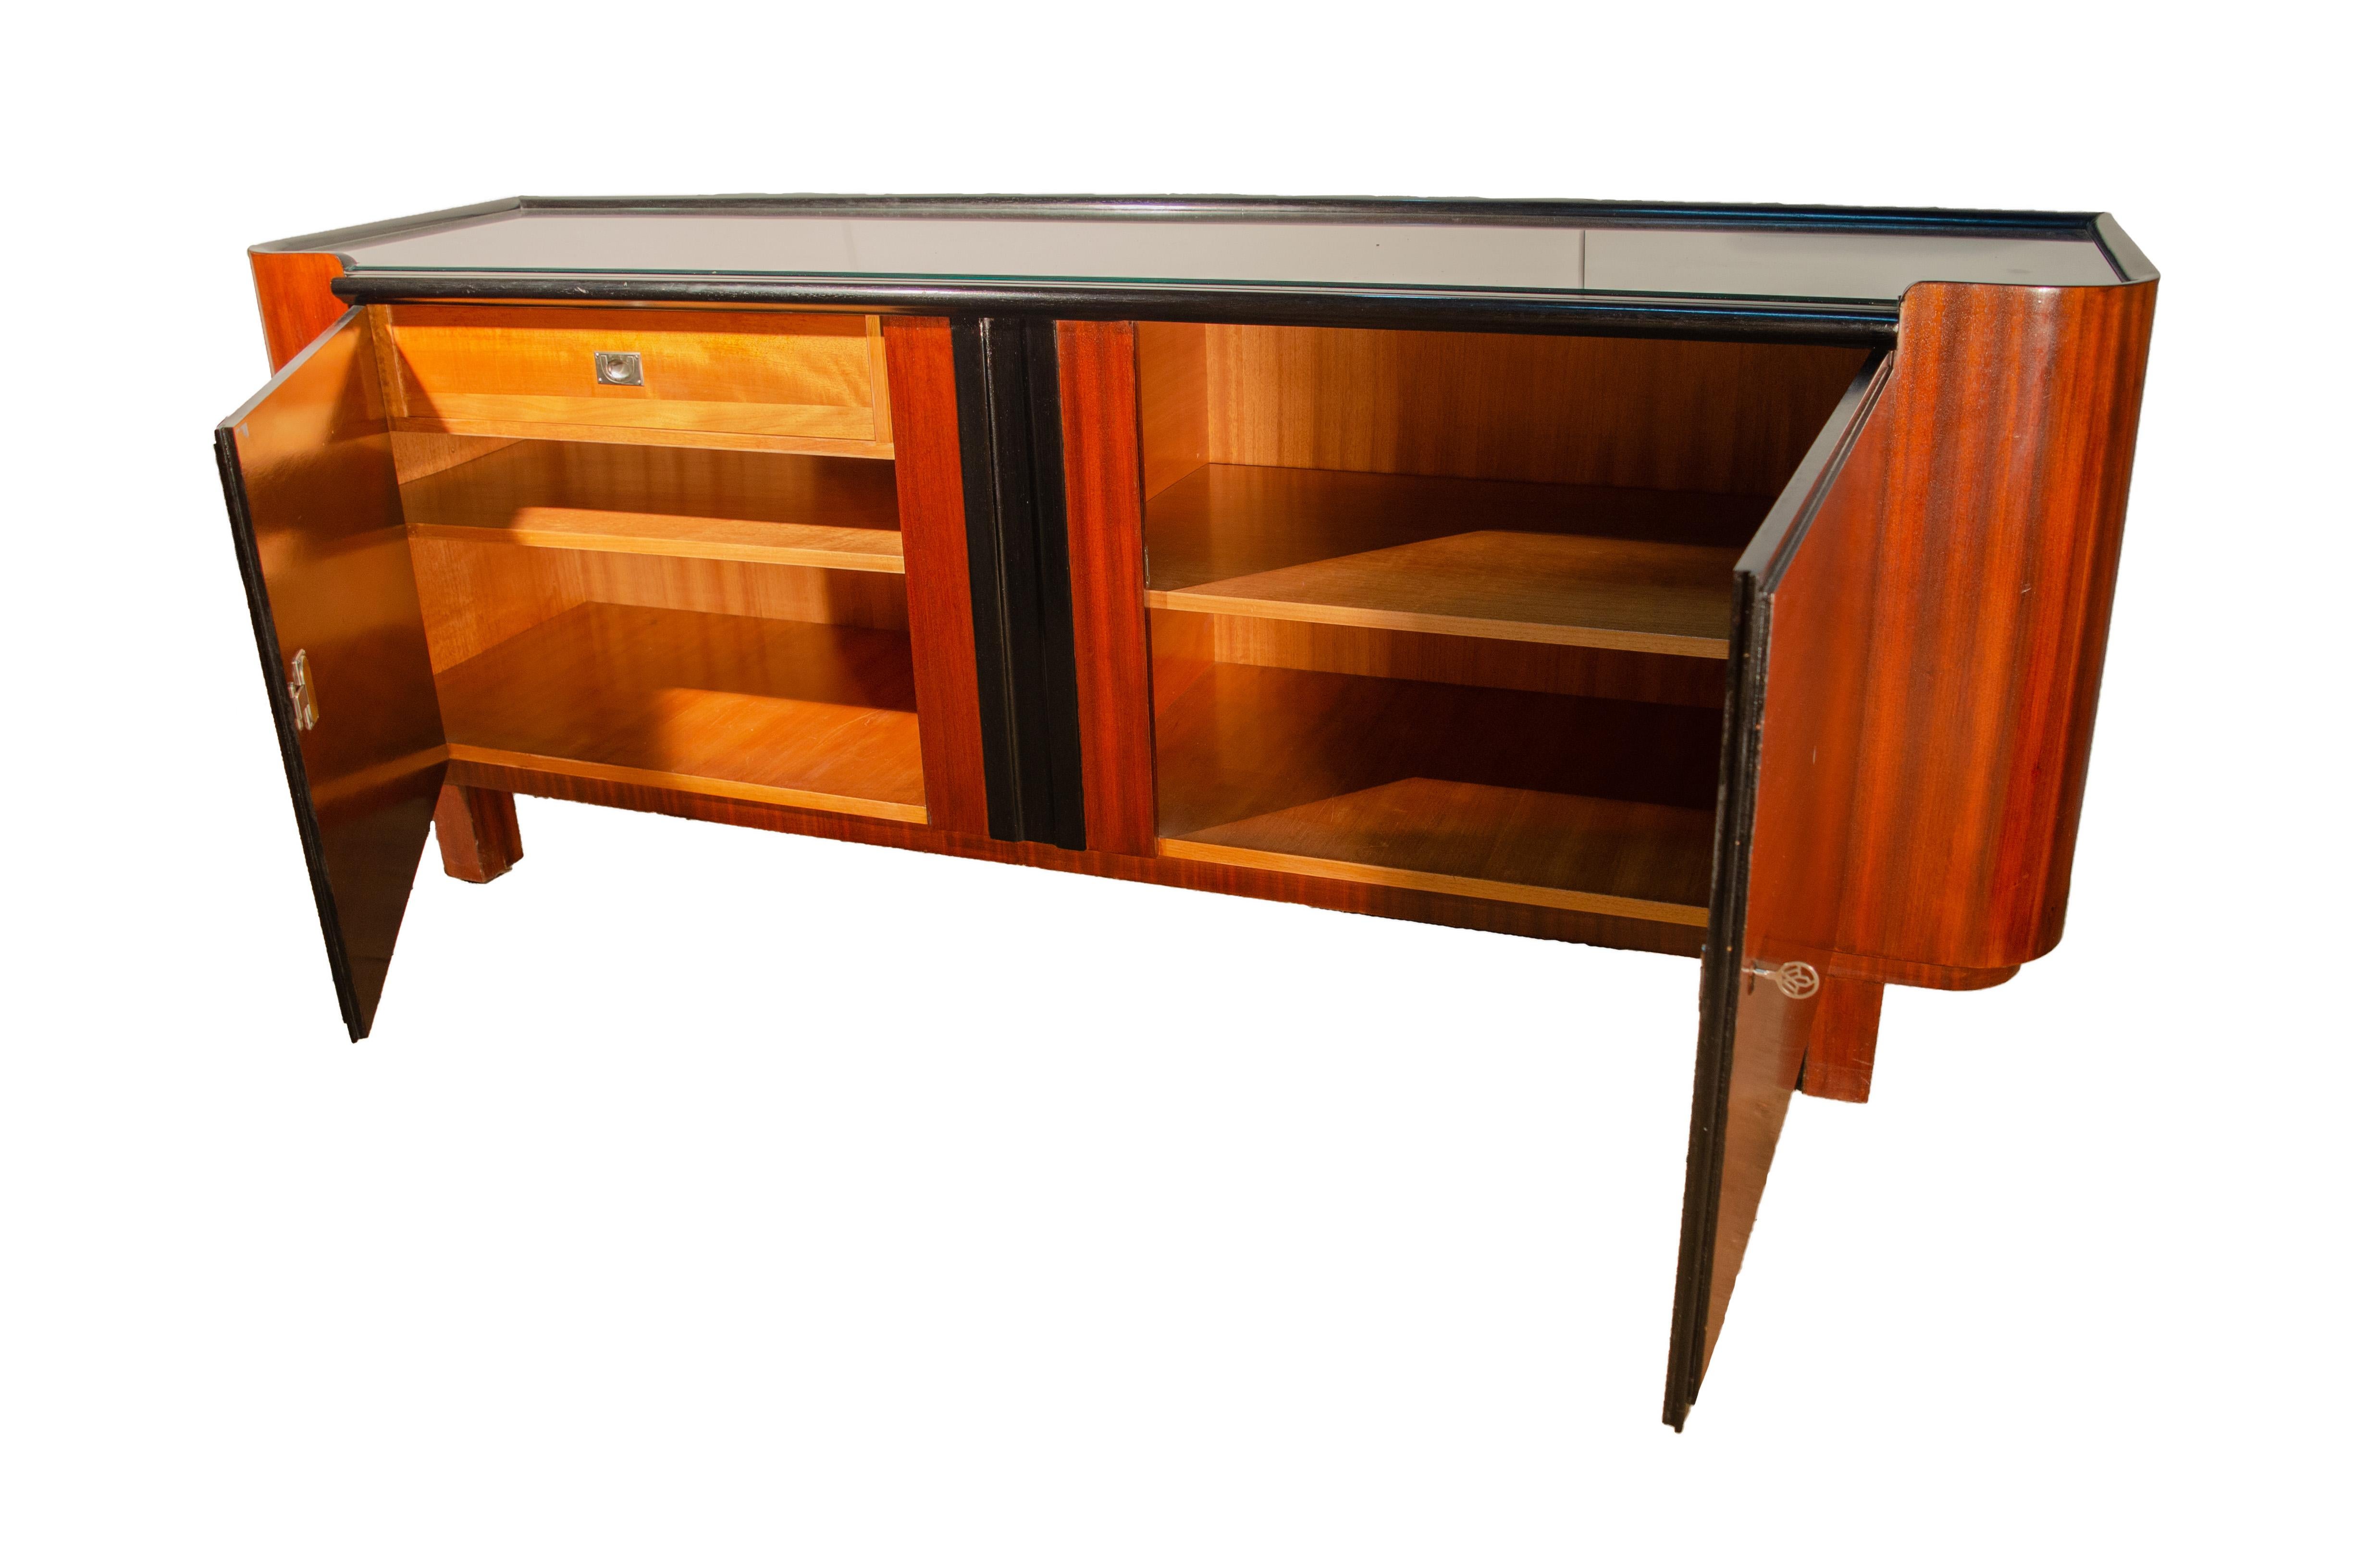 This masterpiece by Bruno Paul is in very good condition.
The signed sideboard, beautifully accented with color, is characterized by its clear design language and has the original keys with the emblem of the Deutsche Werkstätten